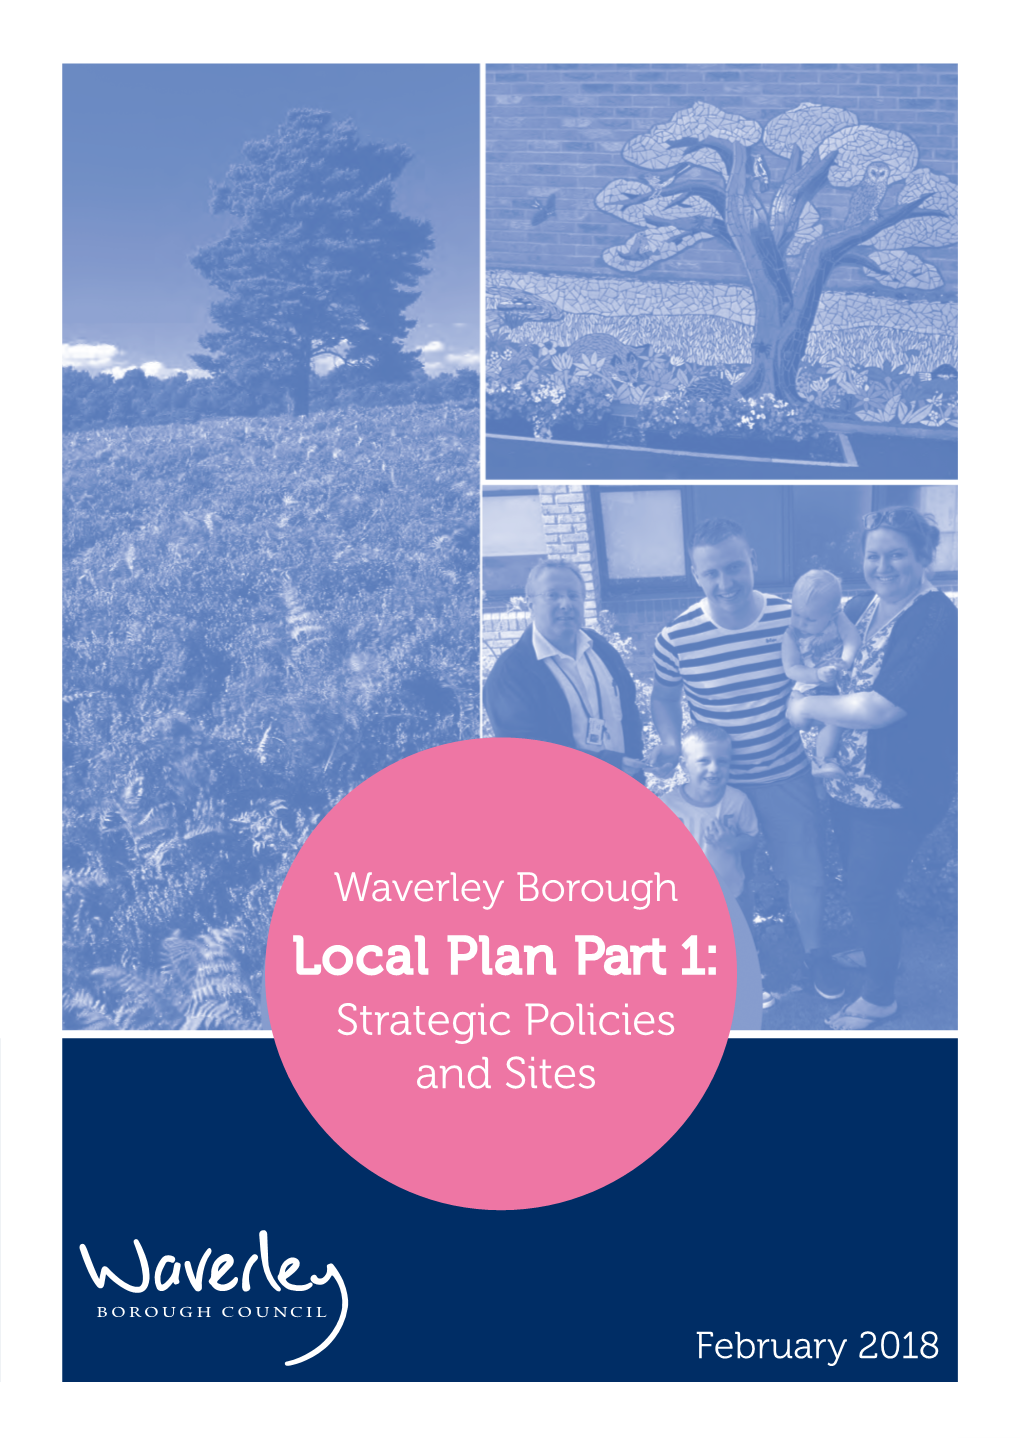 Local Plan Part 1: Strategic Policies and Sites